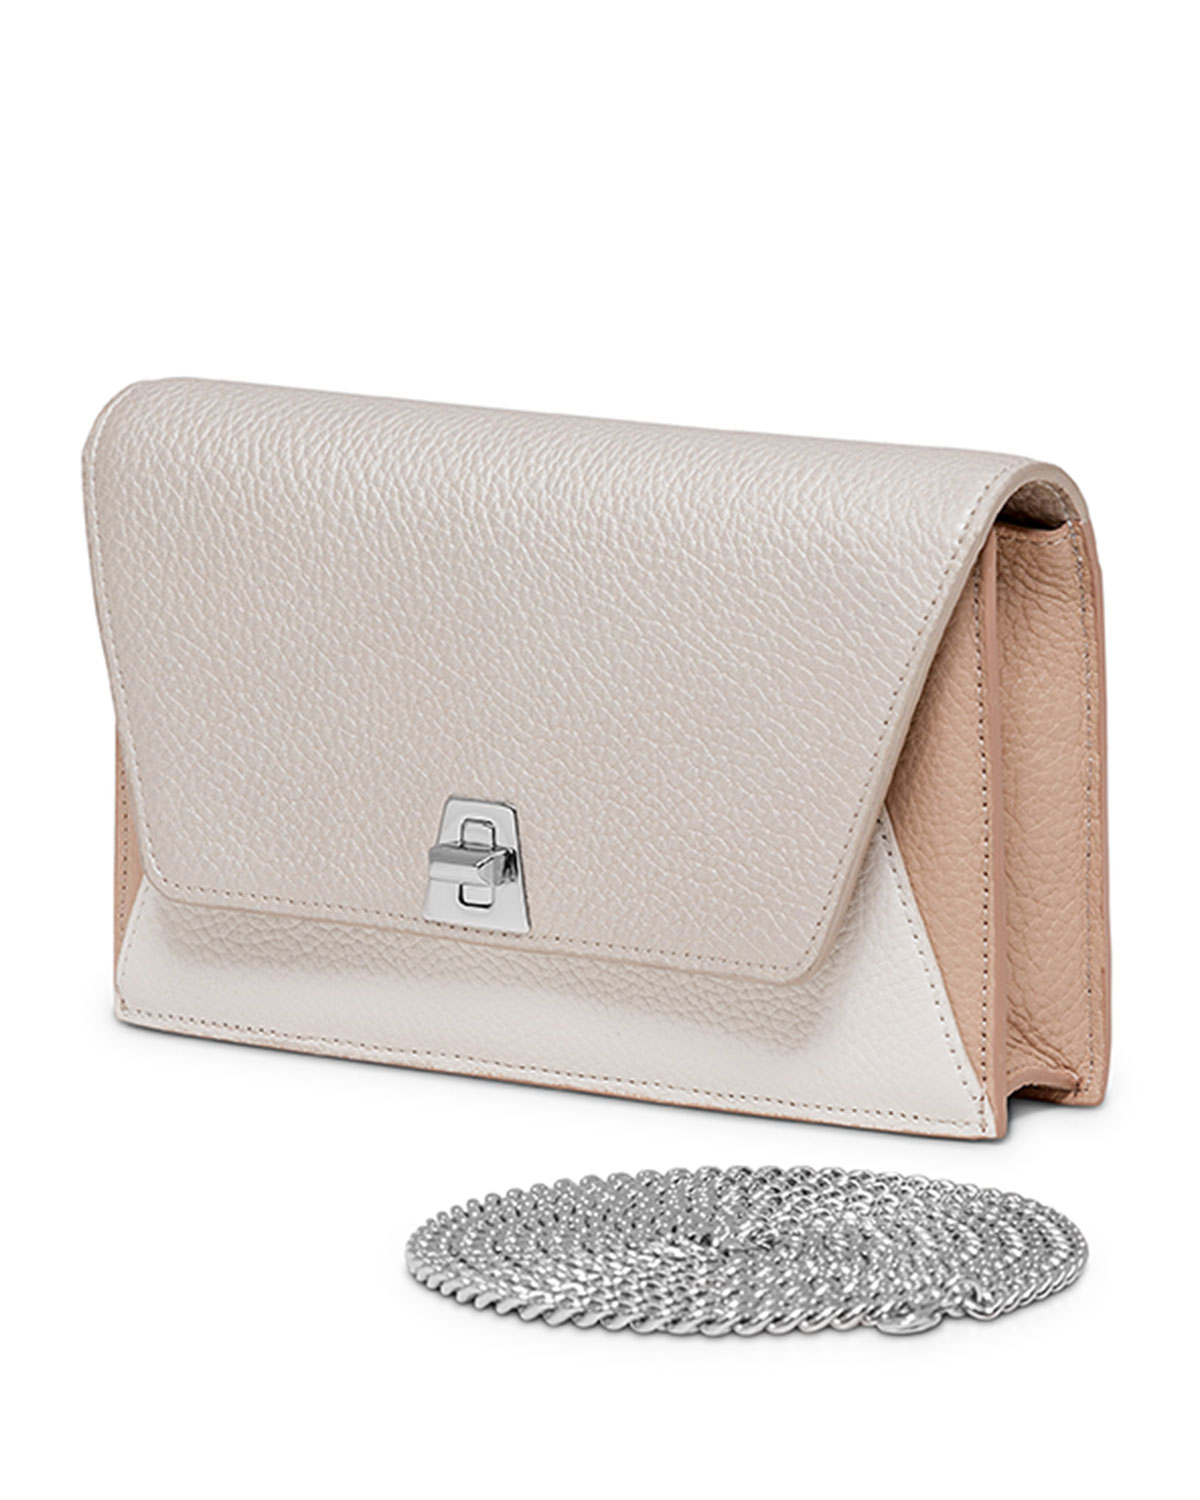 Akris Anouk Leather Clutch Bag W/chain in White - Lyst